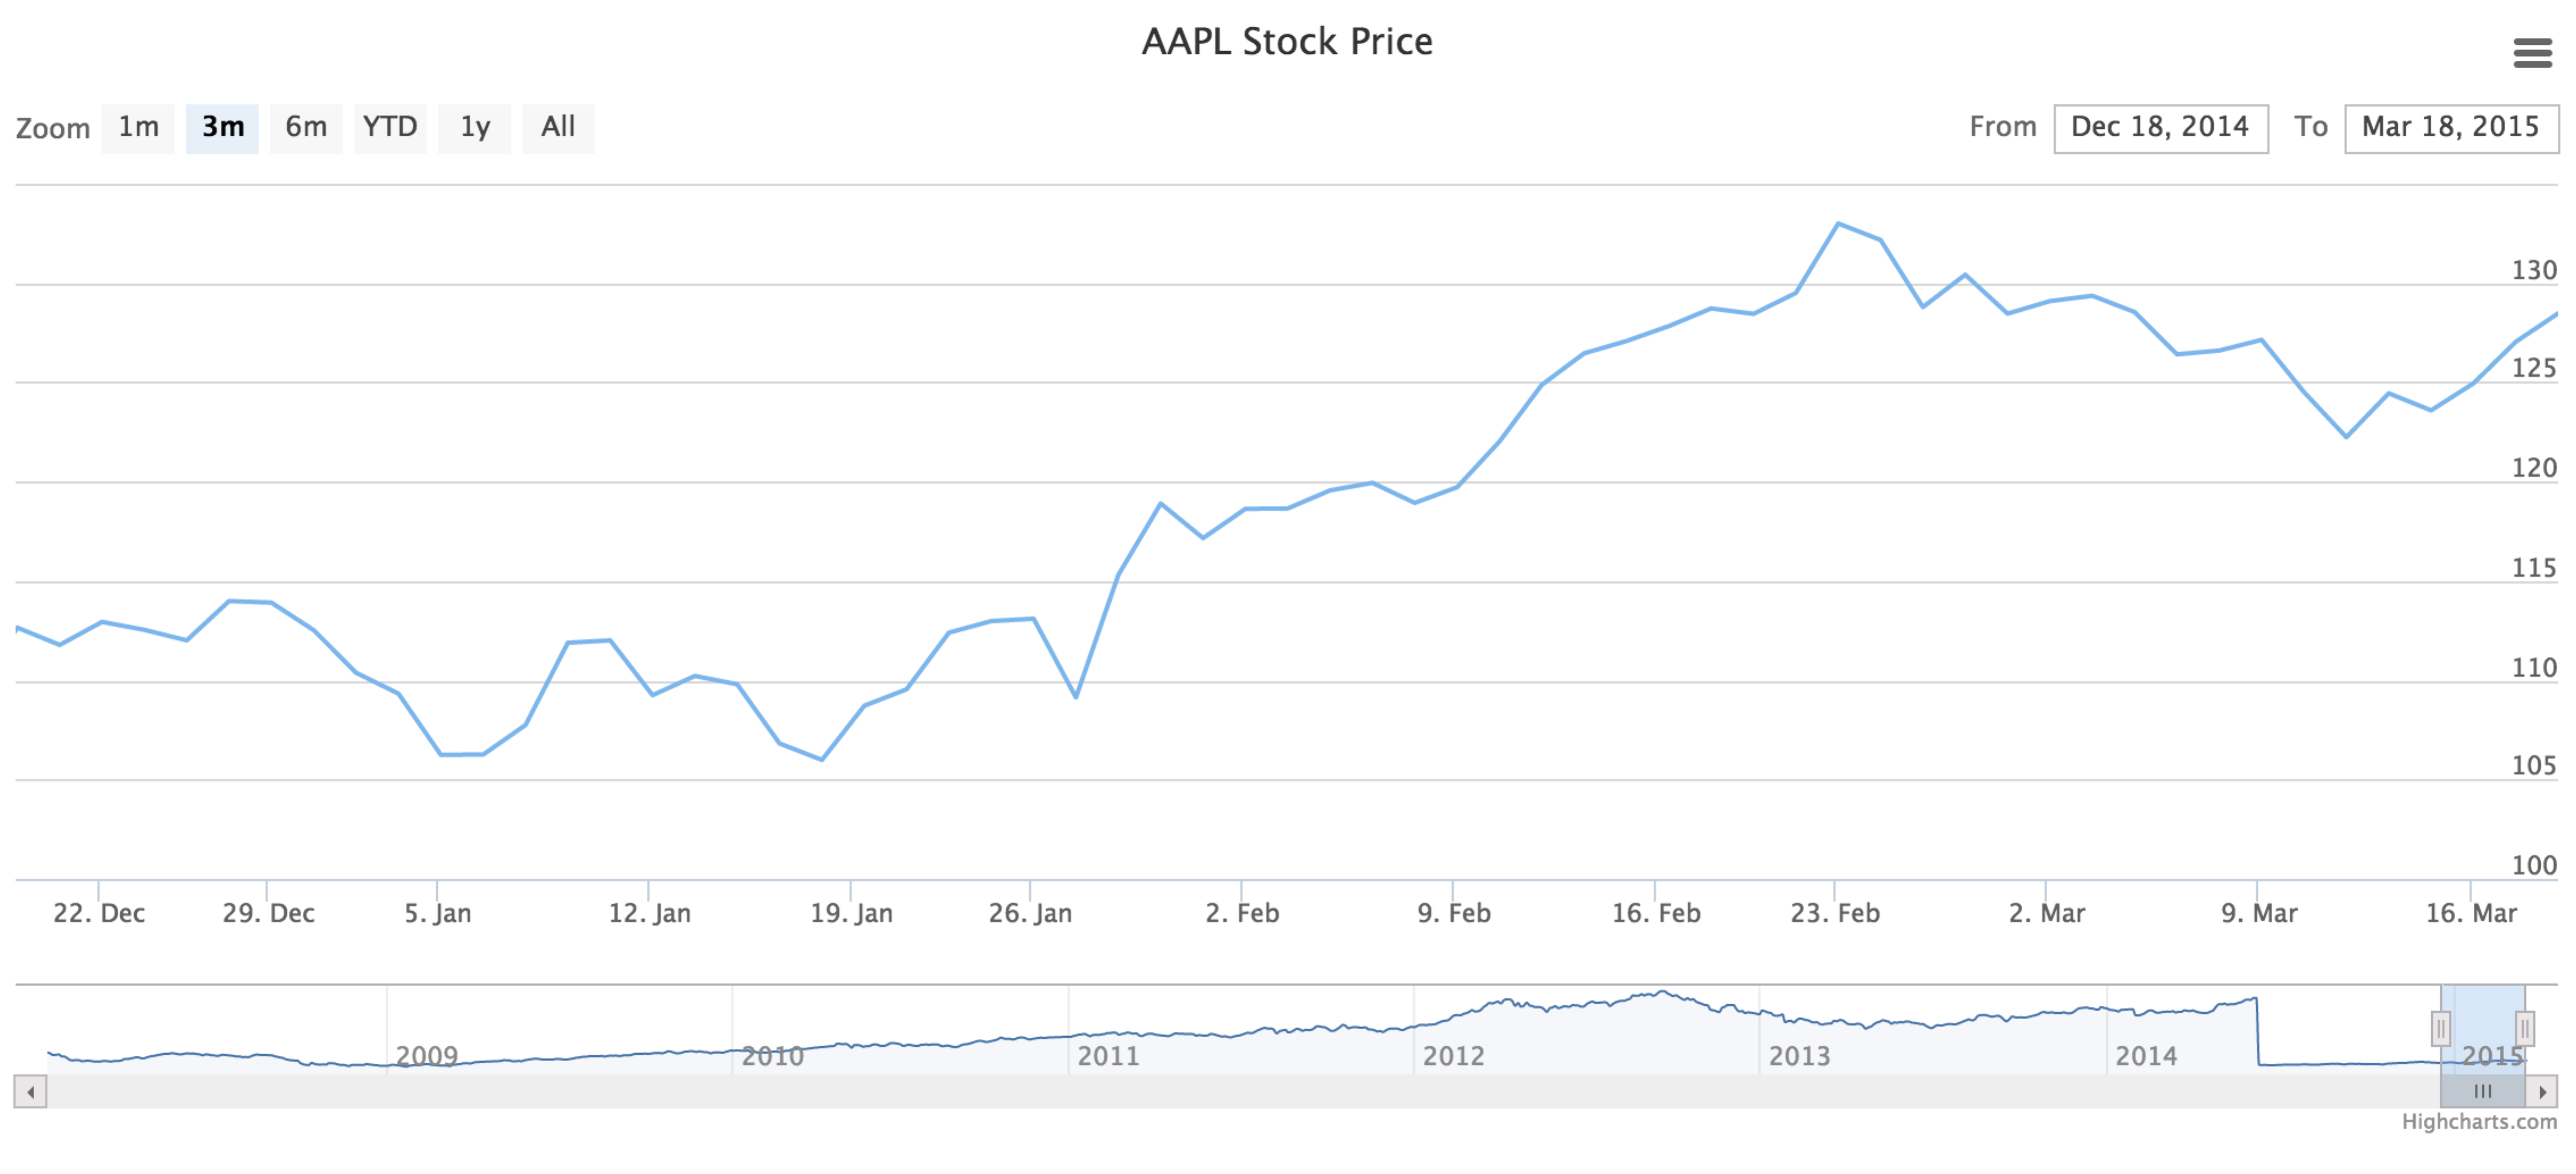 AAPL stock price